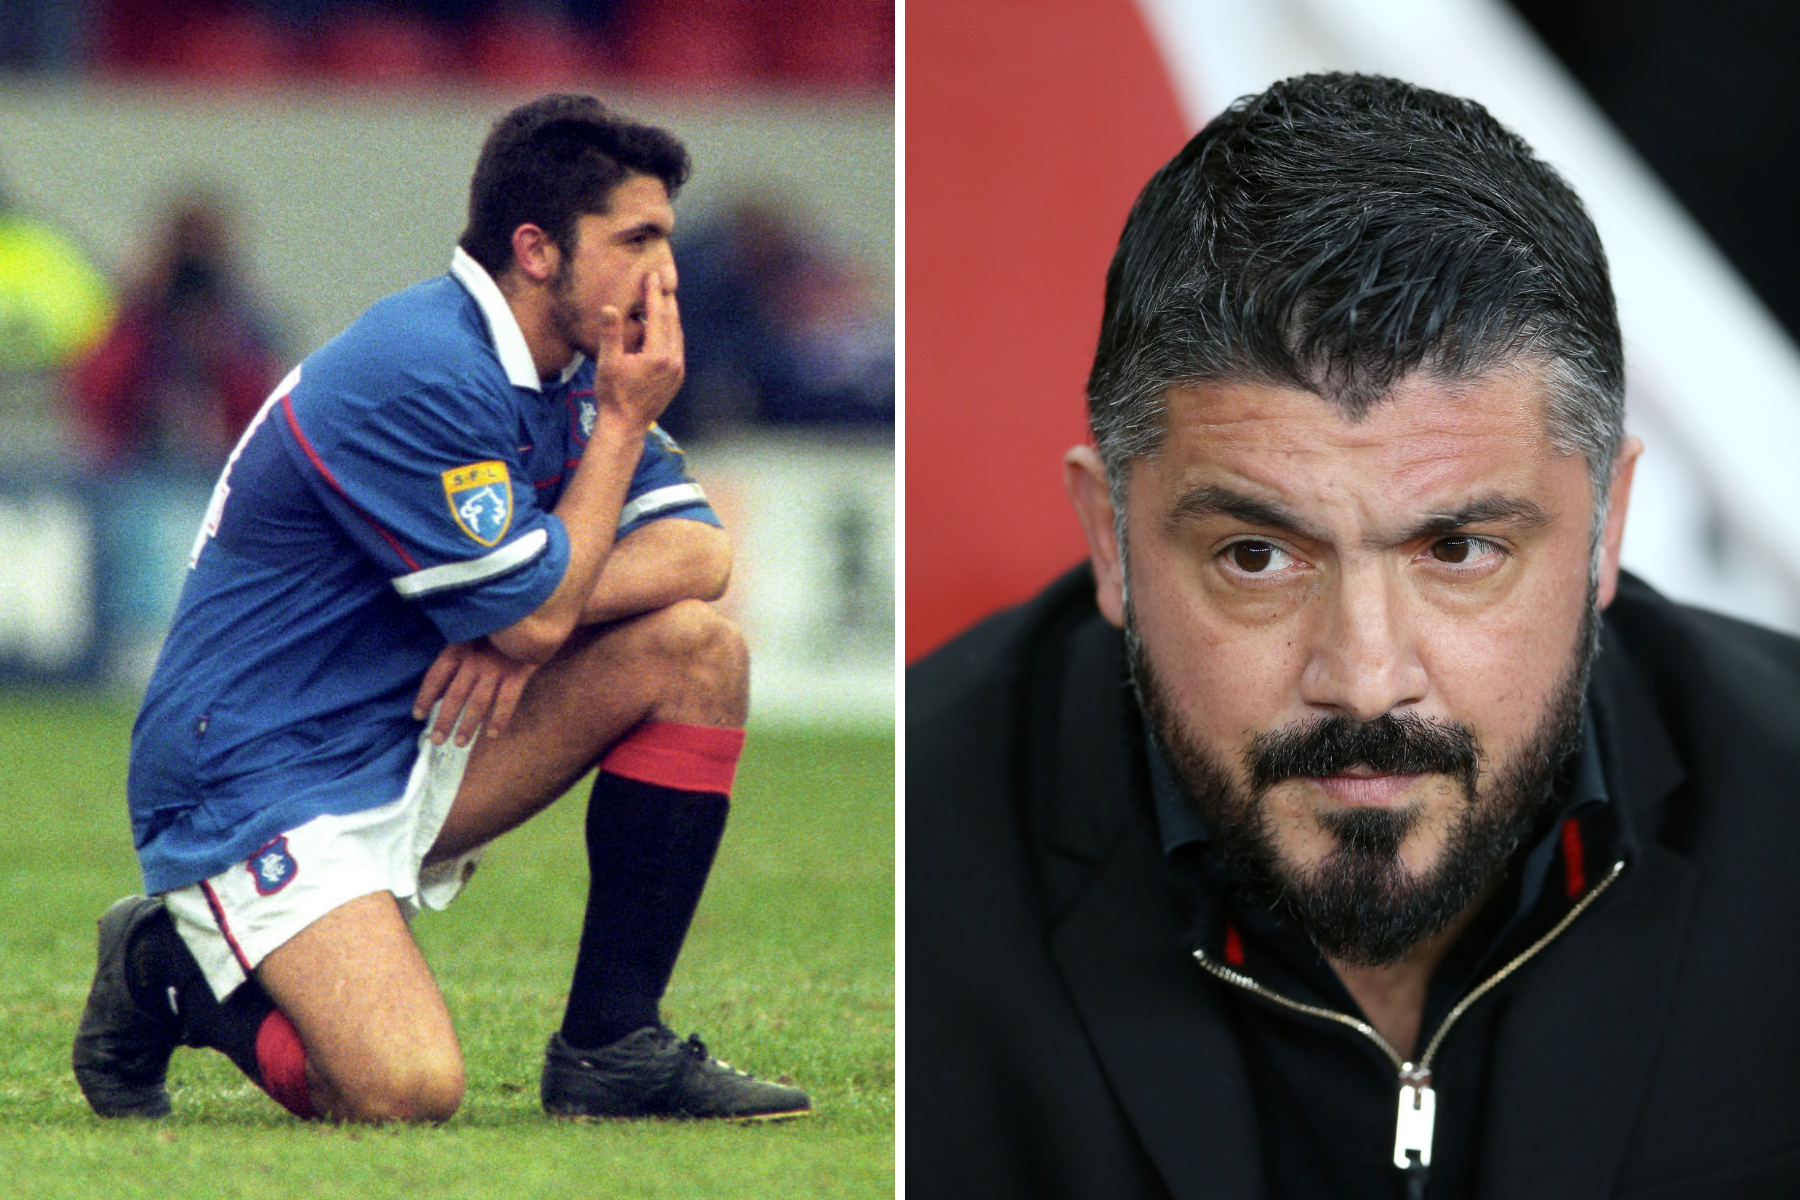 Ex-Rangers star Rino Gattuso leaves managerial role just 23 days after appointment